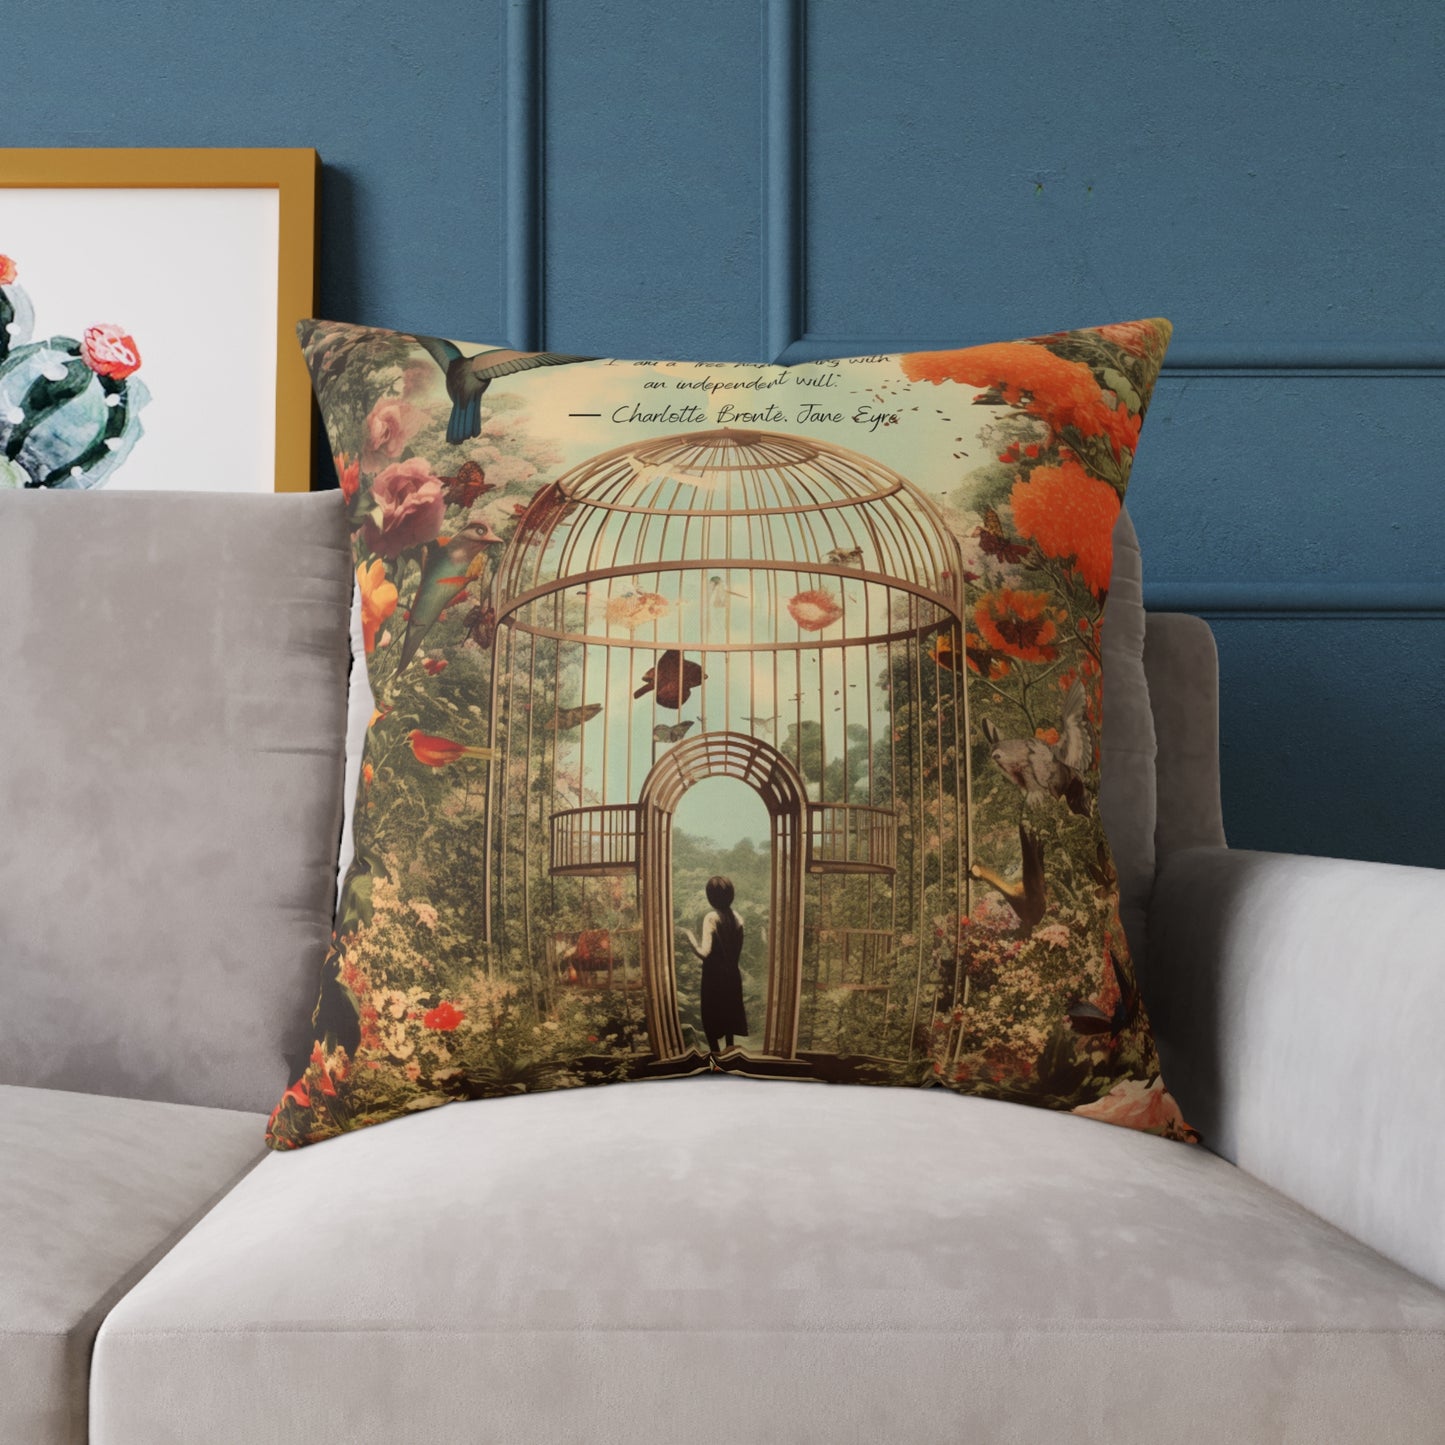 'I am not a bird', from Jane Eyre by Charlotte Bronte, quote on Luxury Cushion